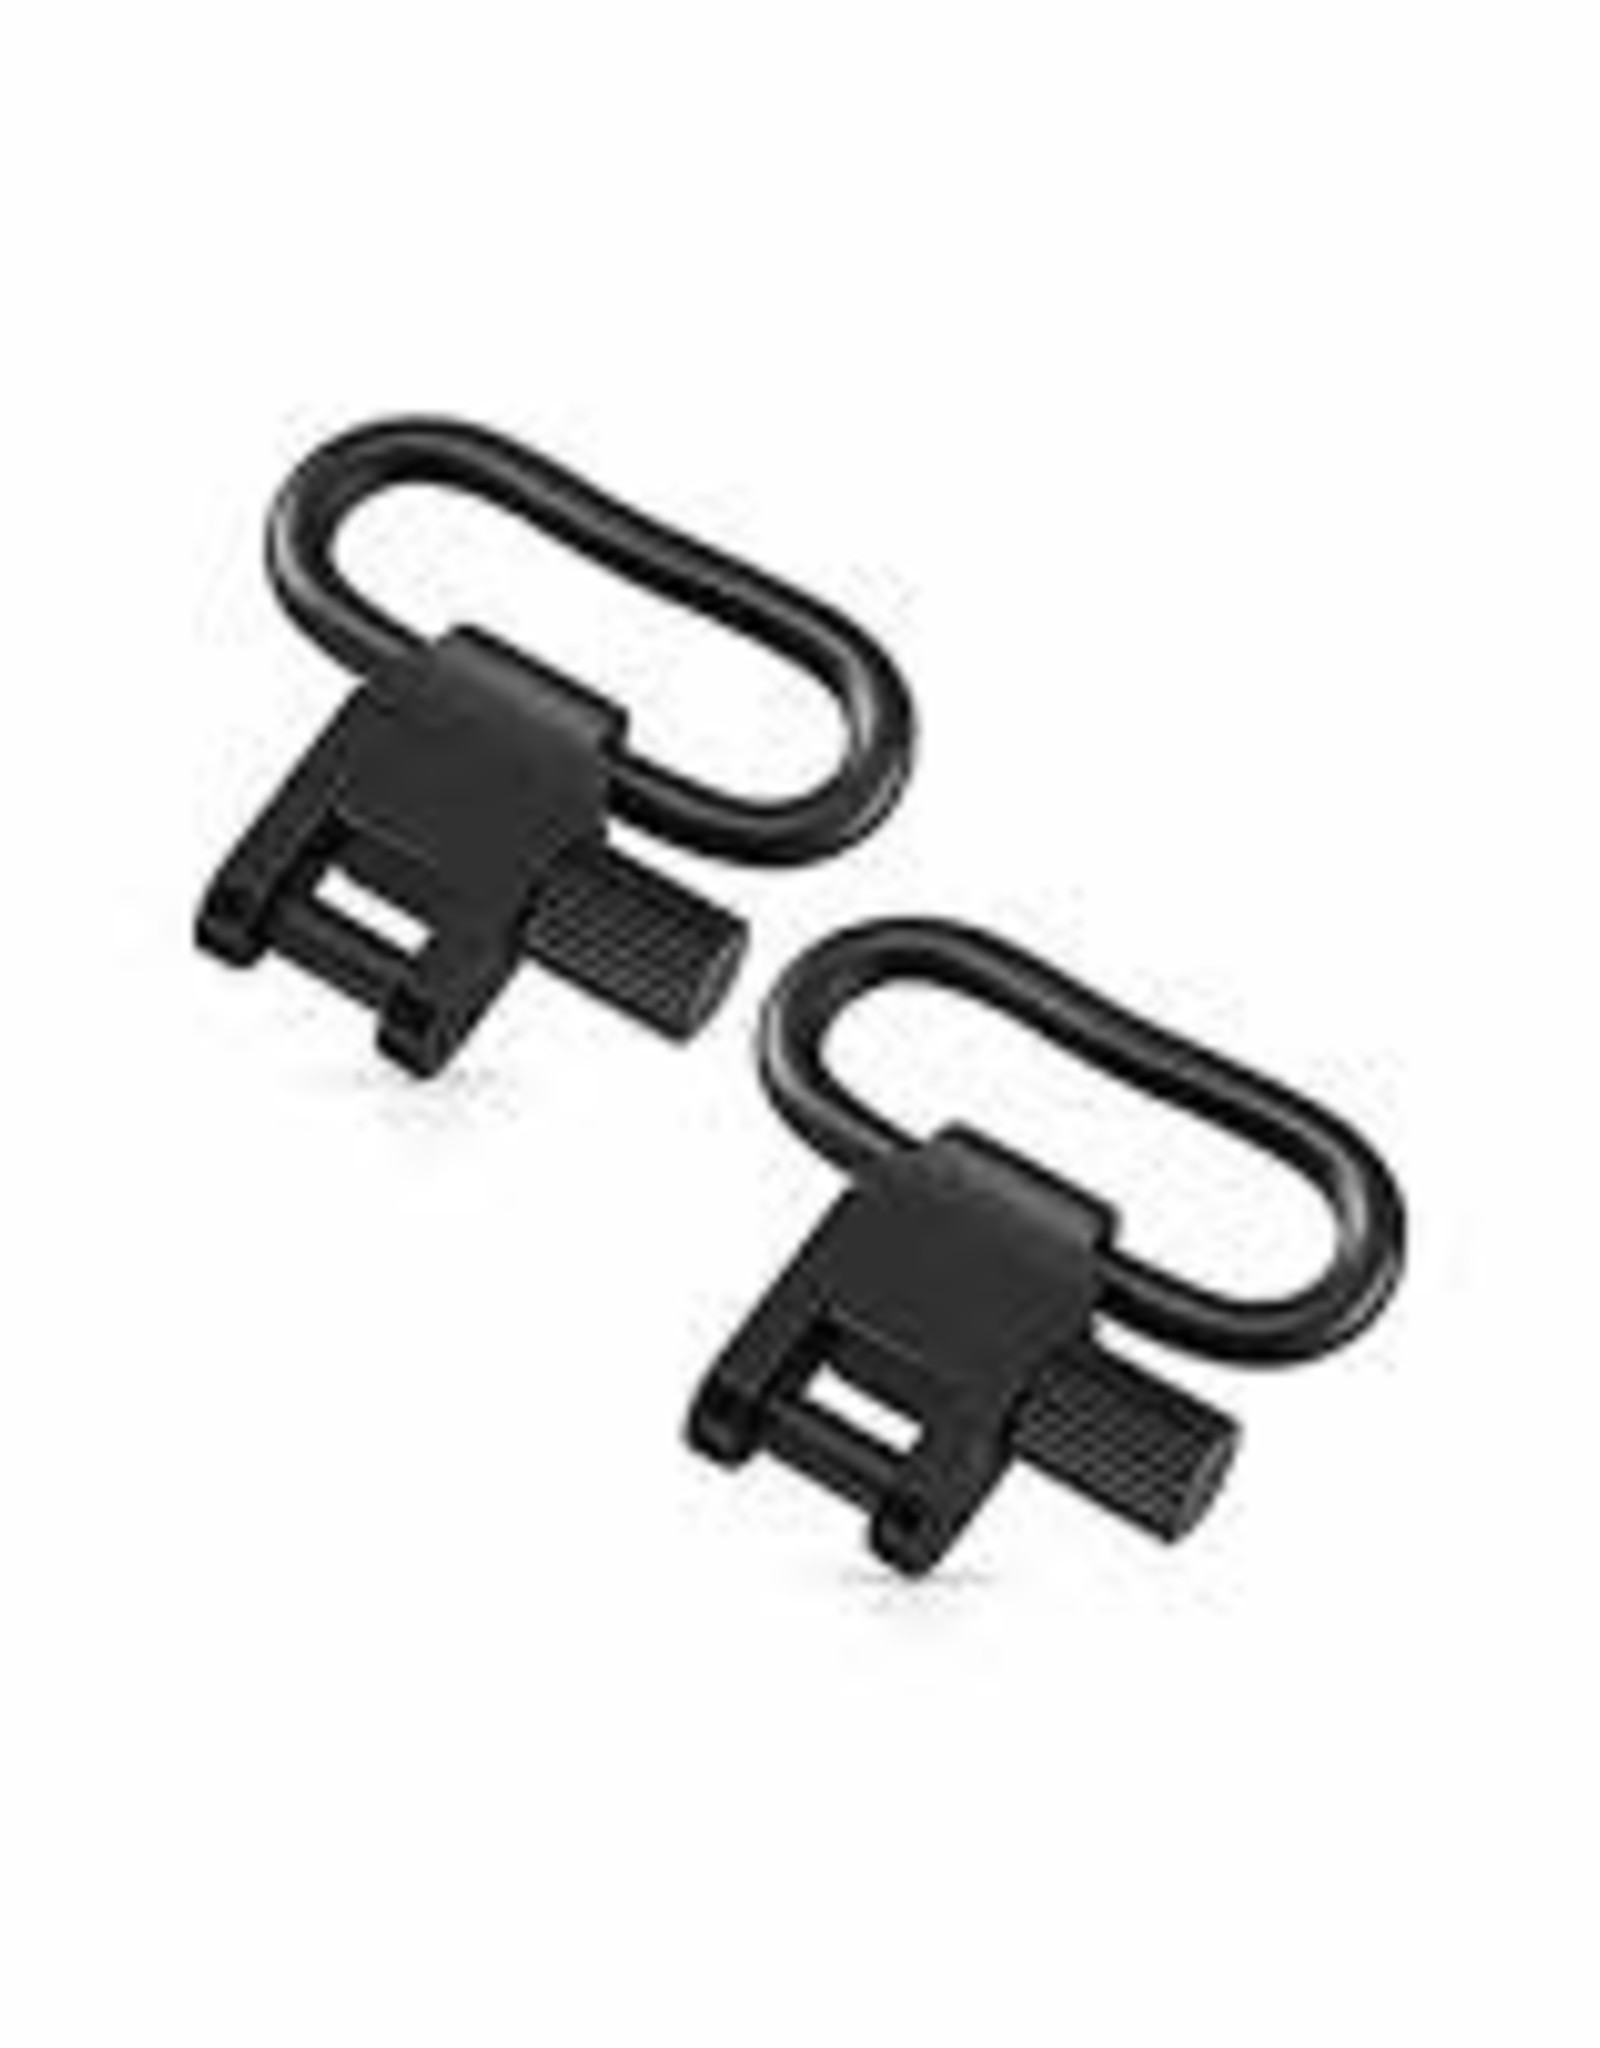 HQ Outfitters Quick Detach Sling Swivel Set